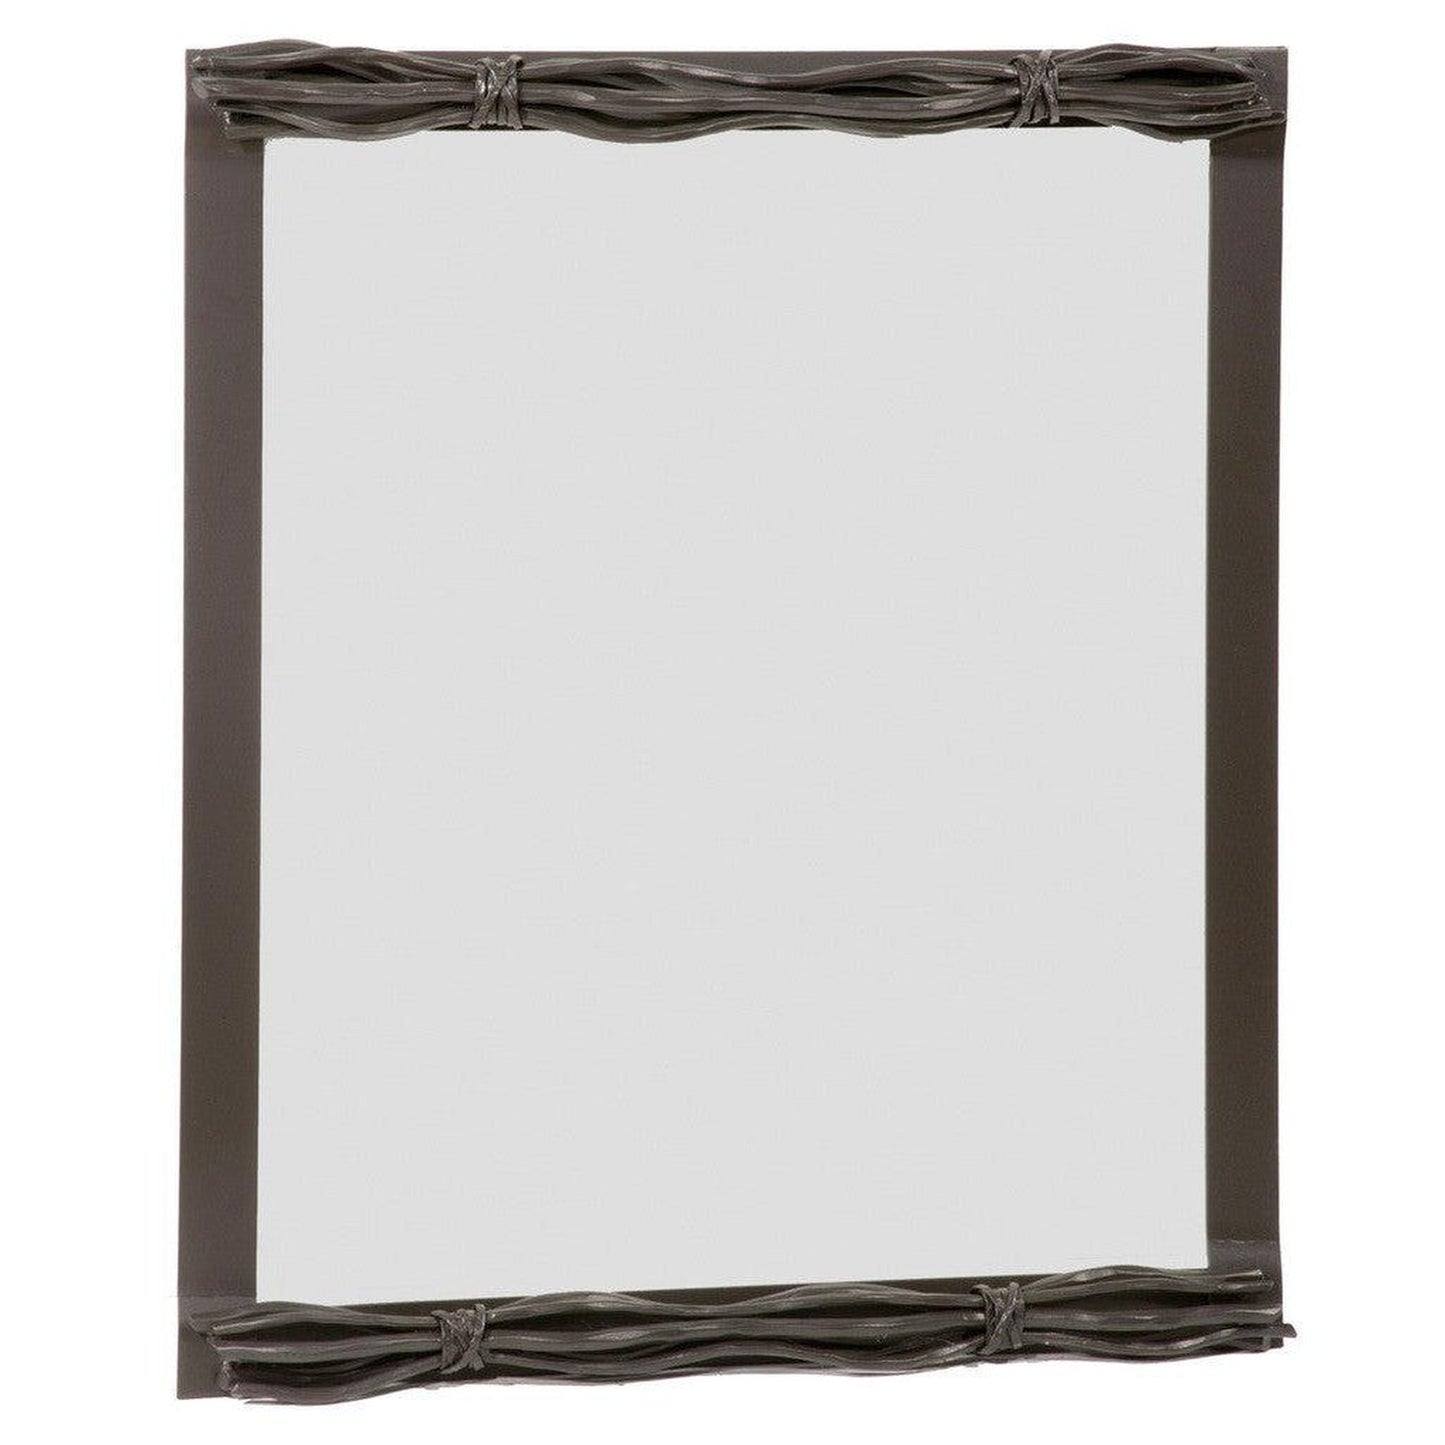 Stone County Ironworks Rush 21" x 26" Small Satin Black Iron Wall Mirror With Pewter Iron Accent